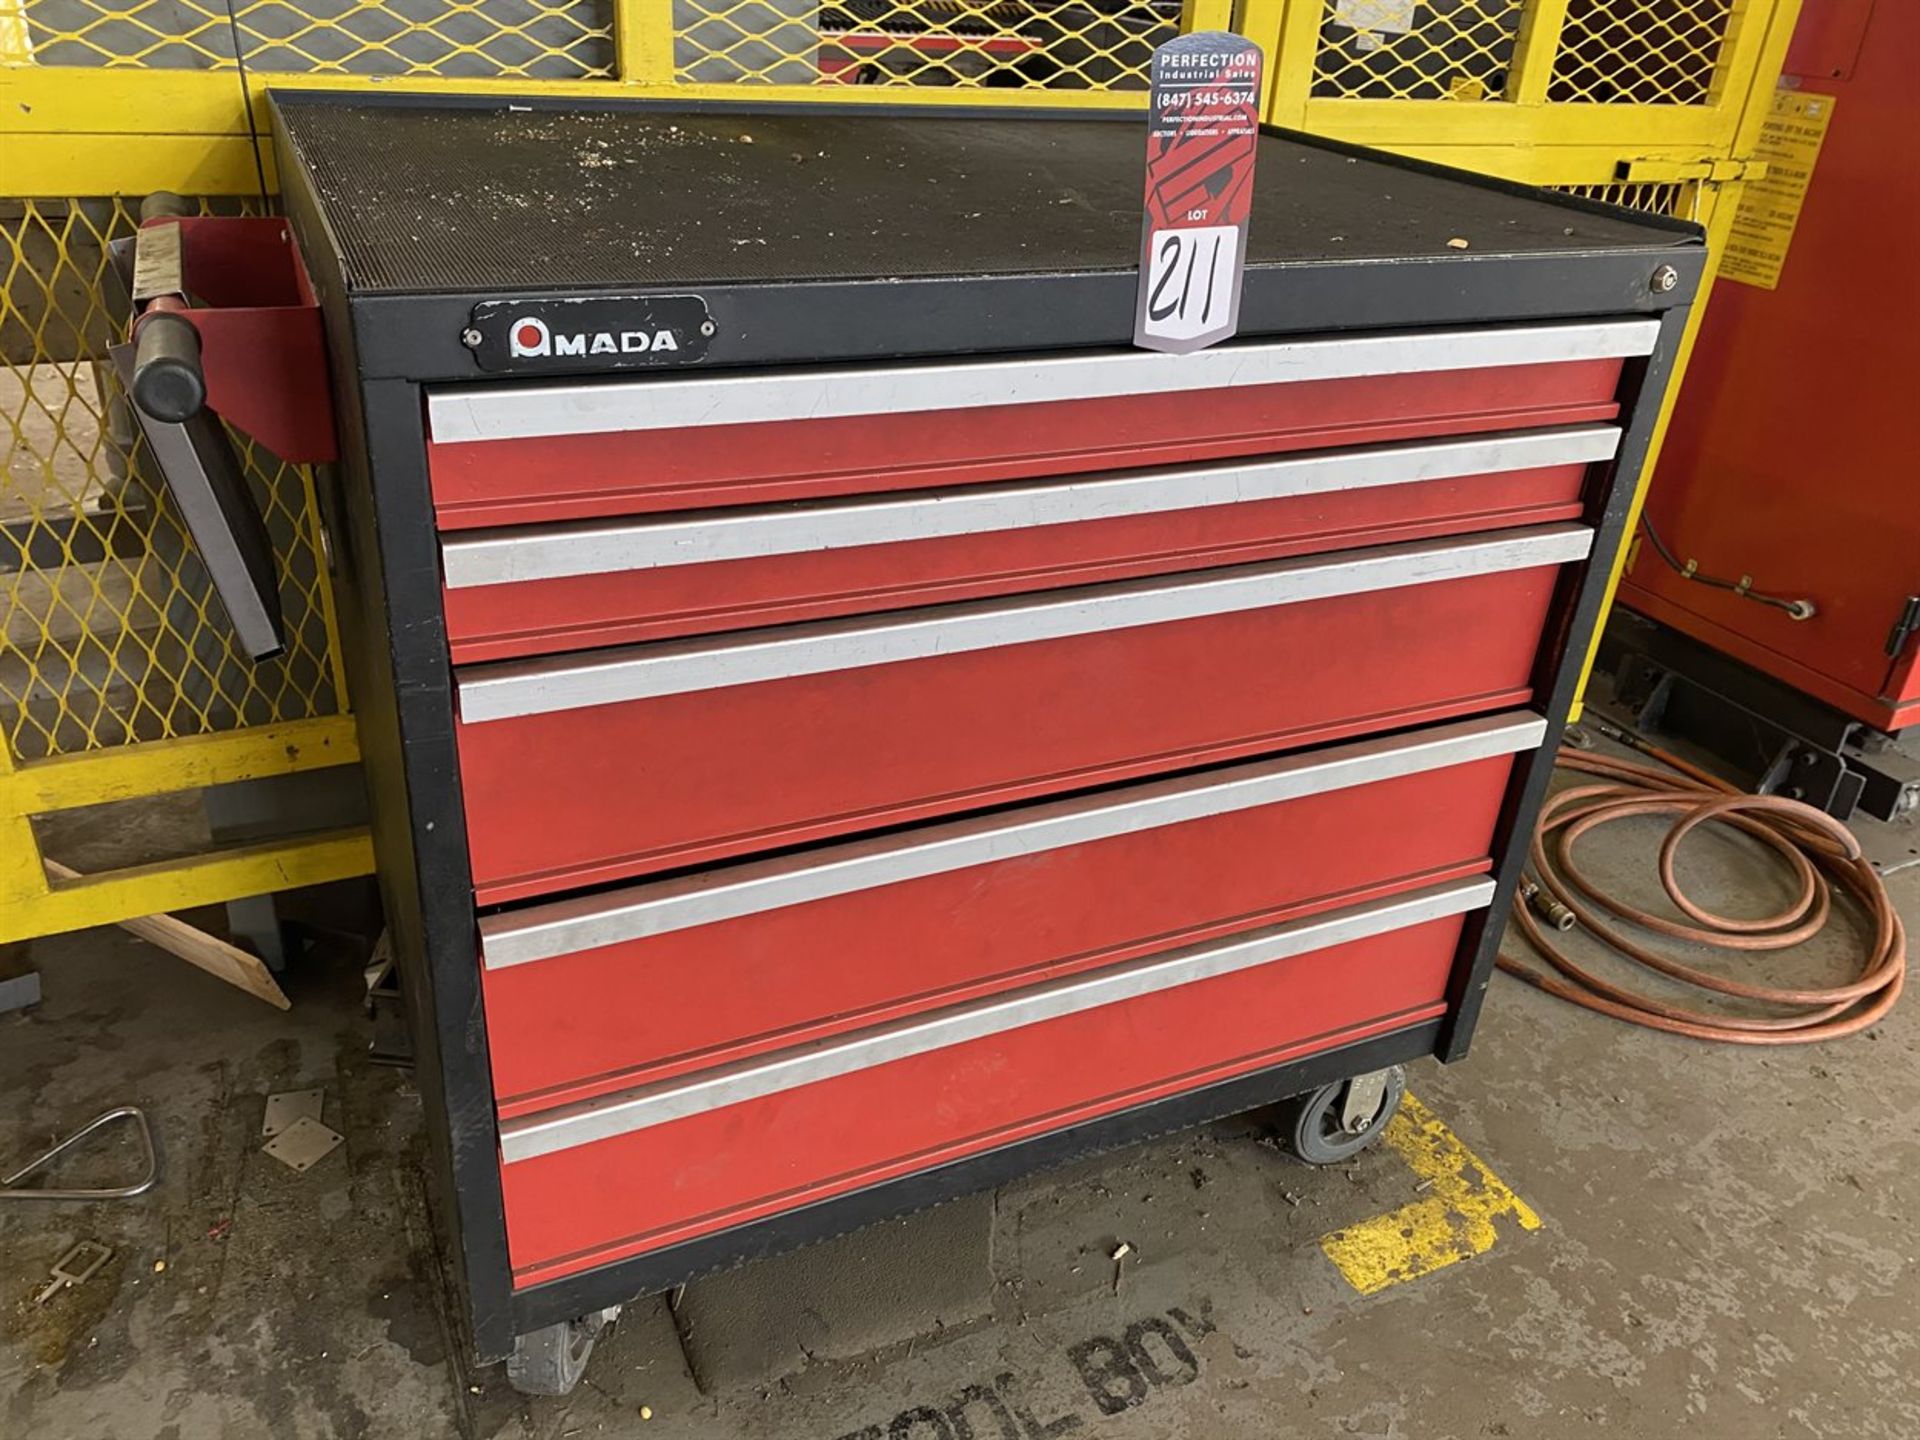 AMADA Cabinet w/ Contents Including Assorted Press Brake Tooling